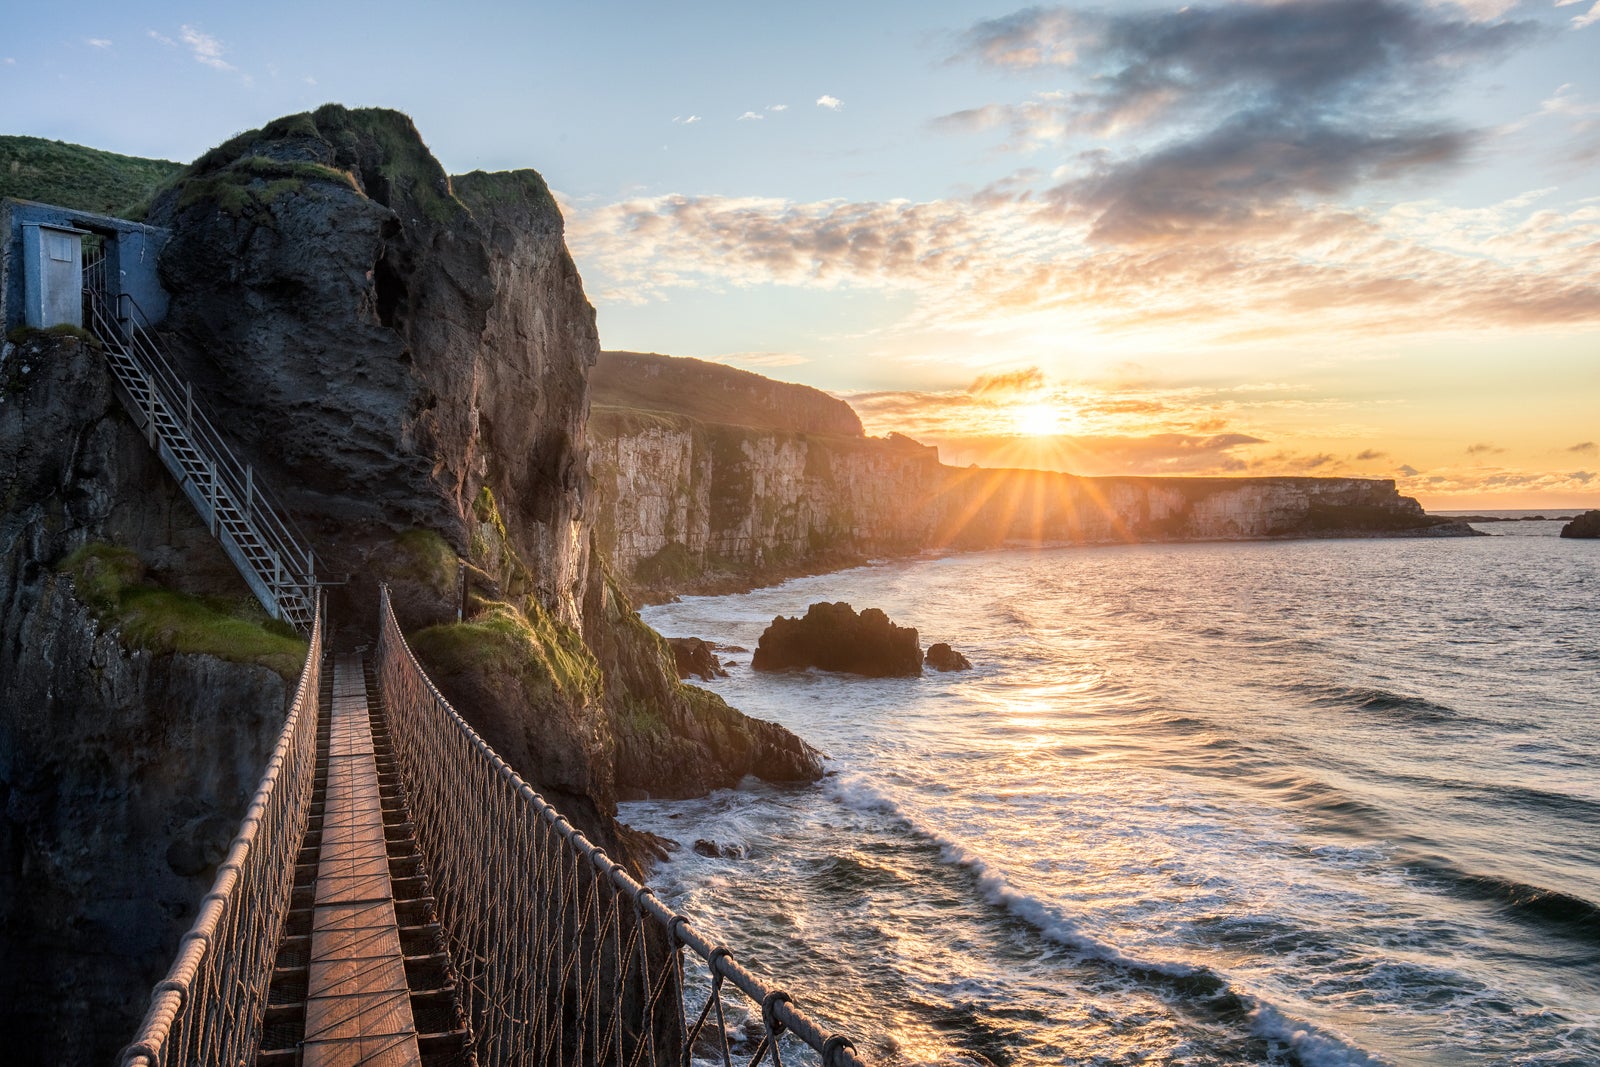 Carrick-a-Rede Rope Bridge at sunset, County Antrim, Ulster, Northern Ireland, United Kingdom, Europe